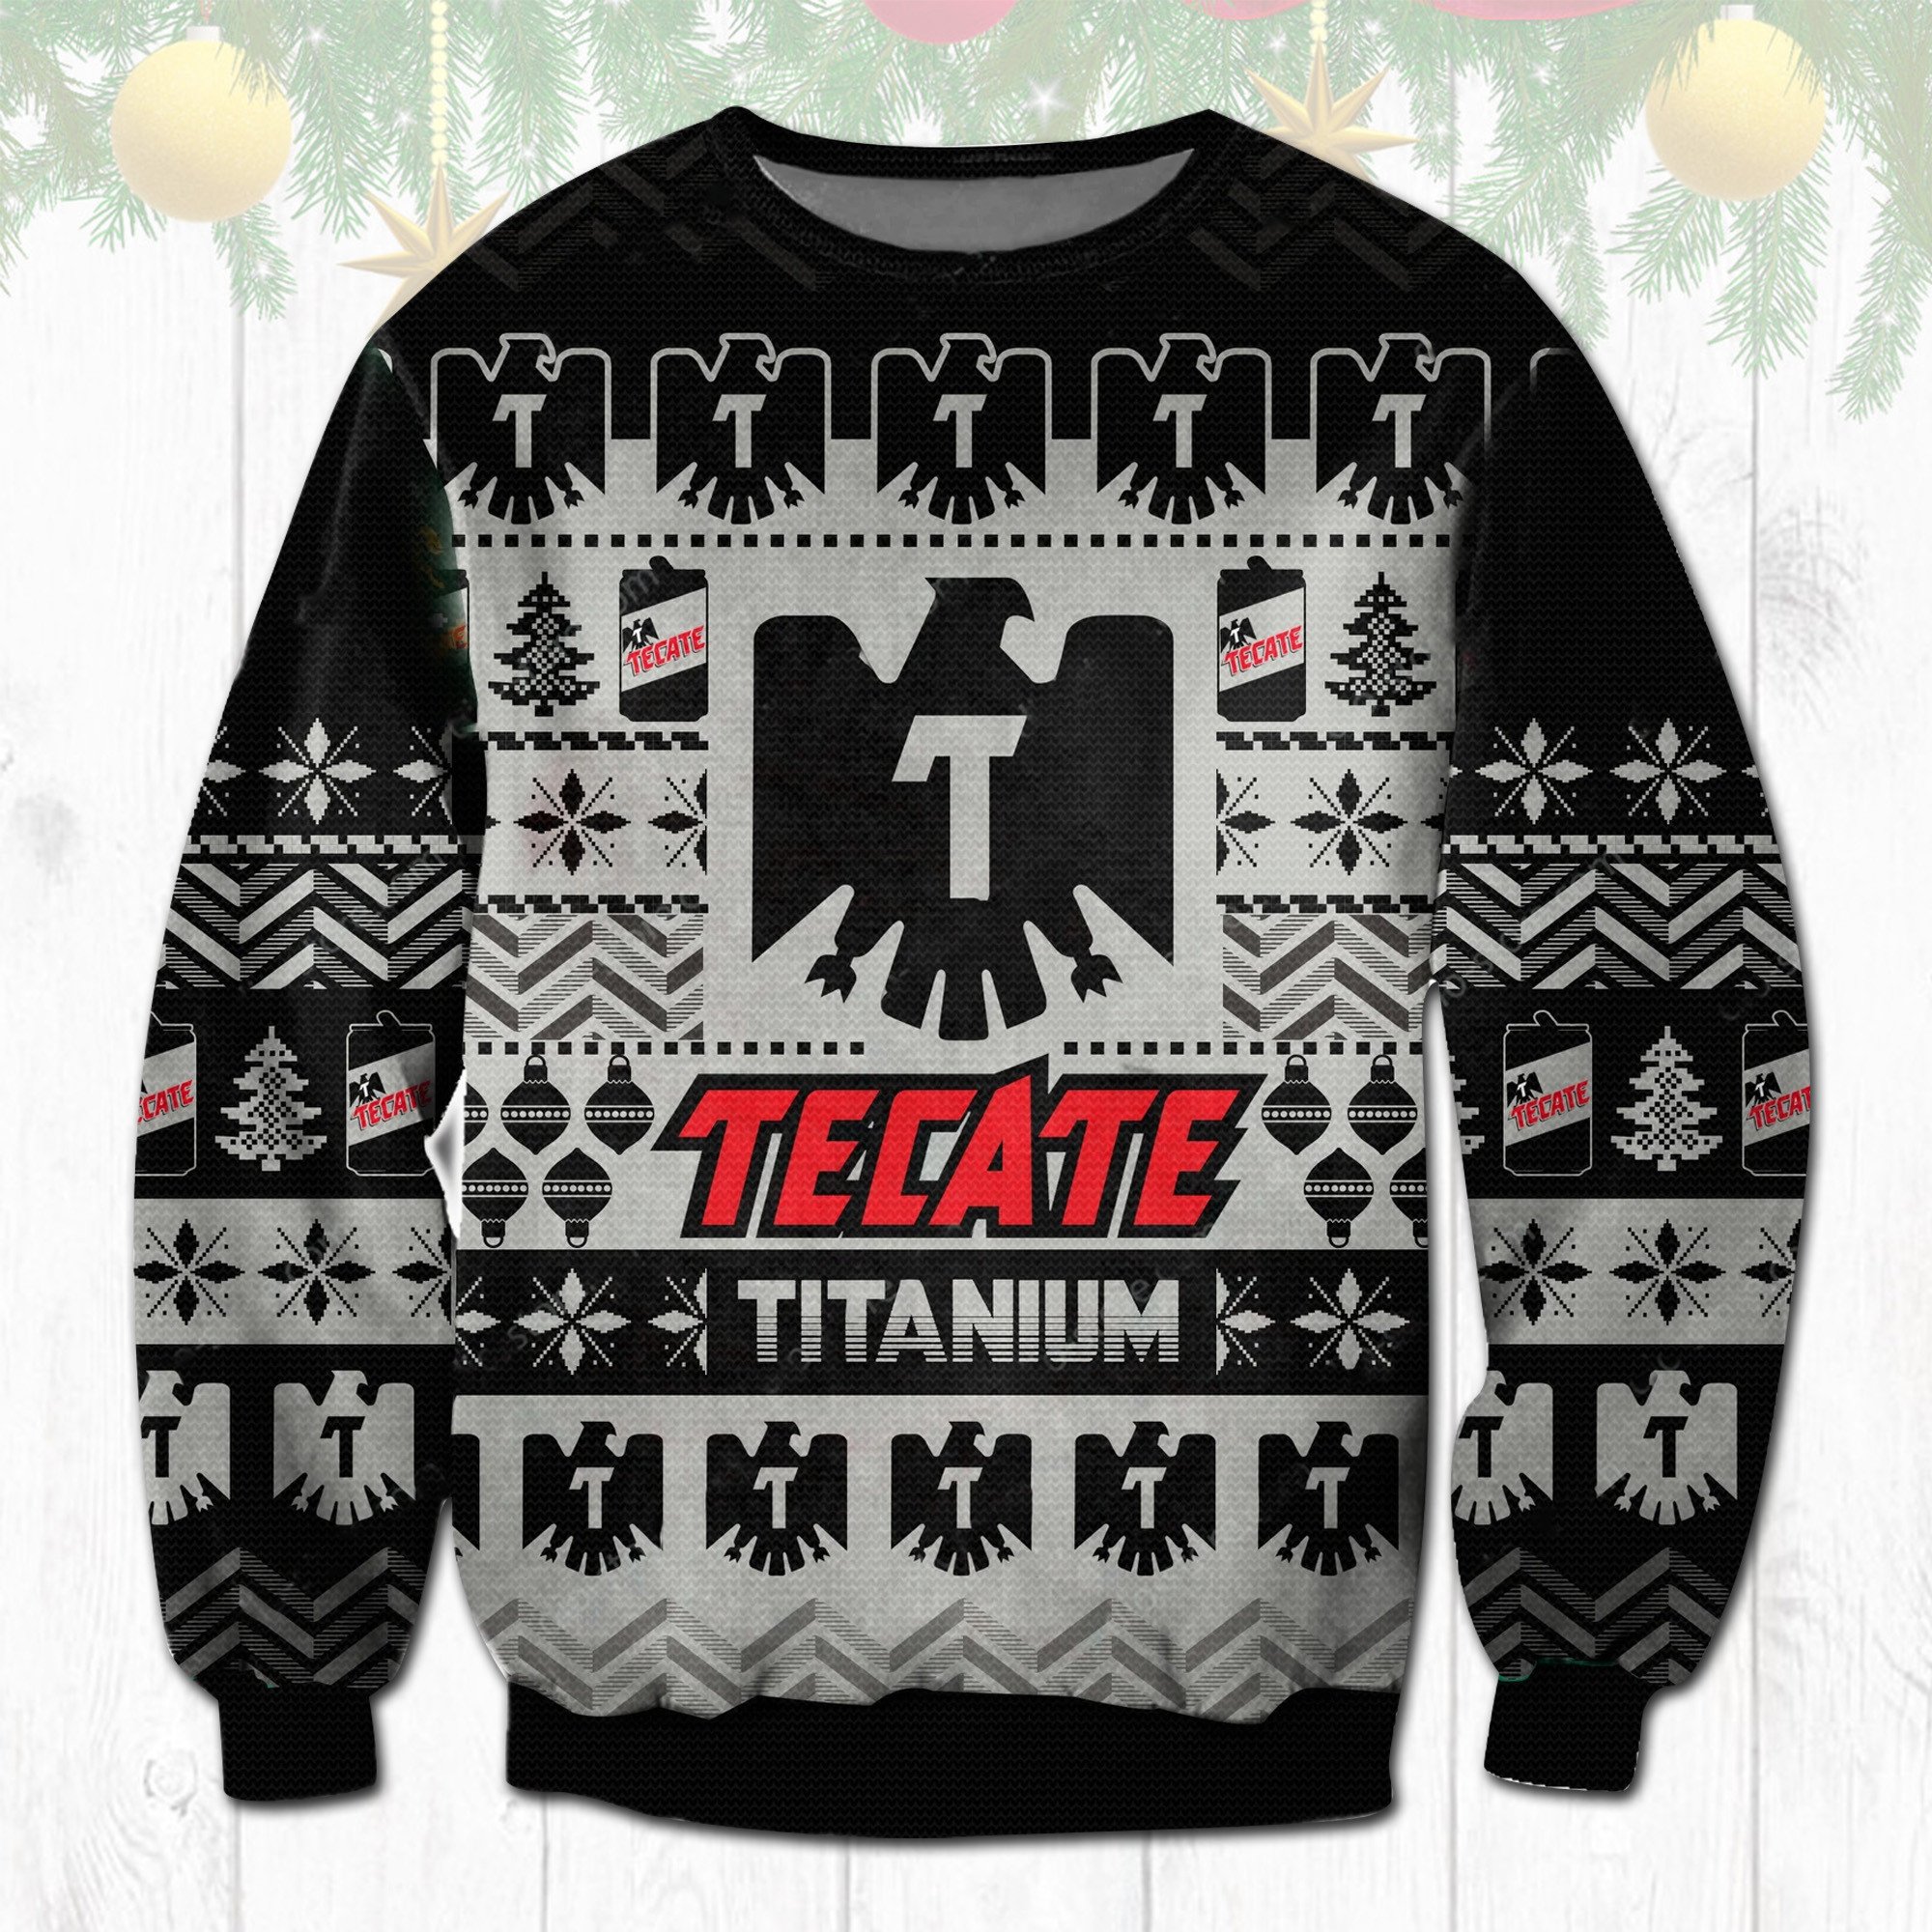 HOT Tecate Titanium Beer ugly Christmas sweater 6